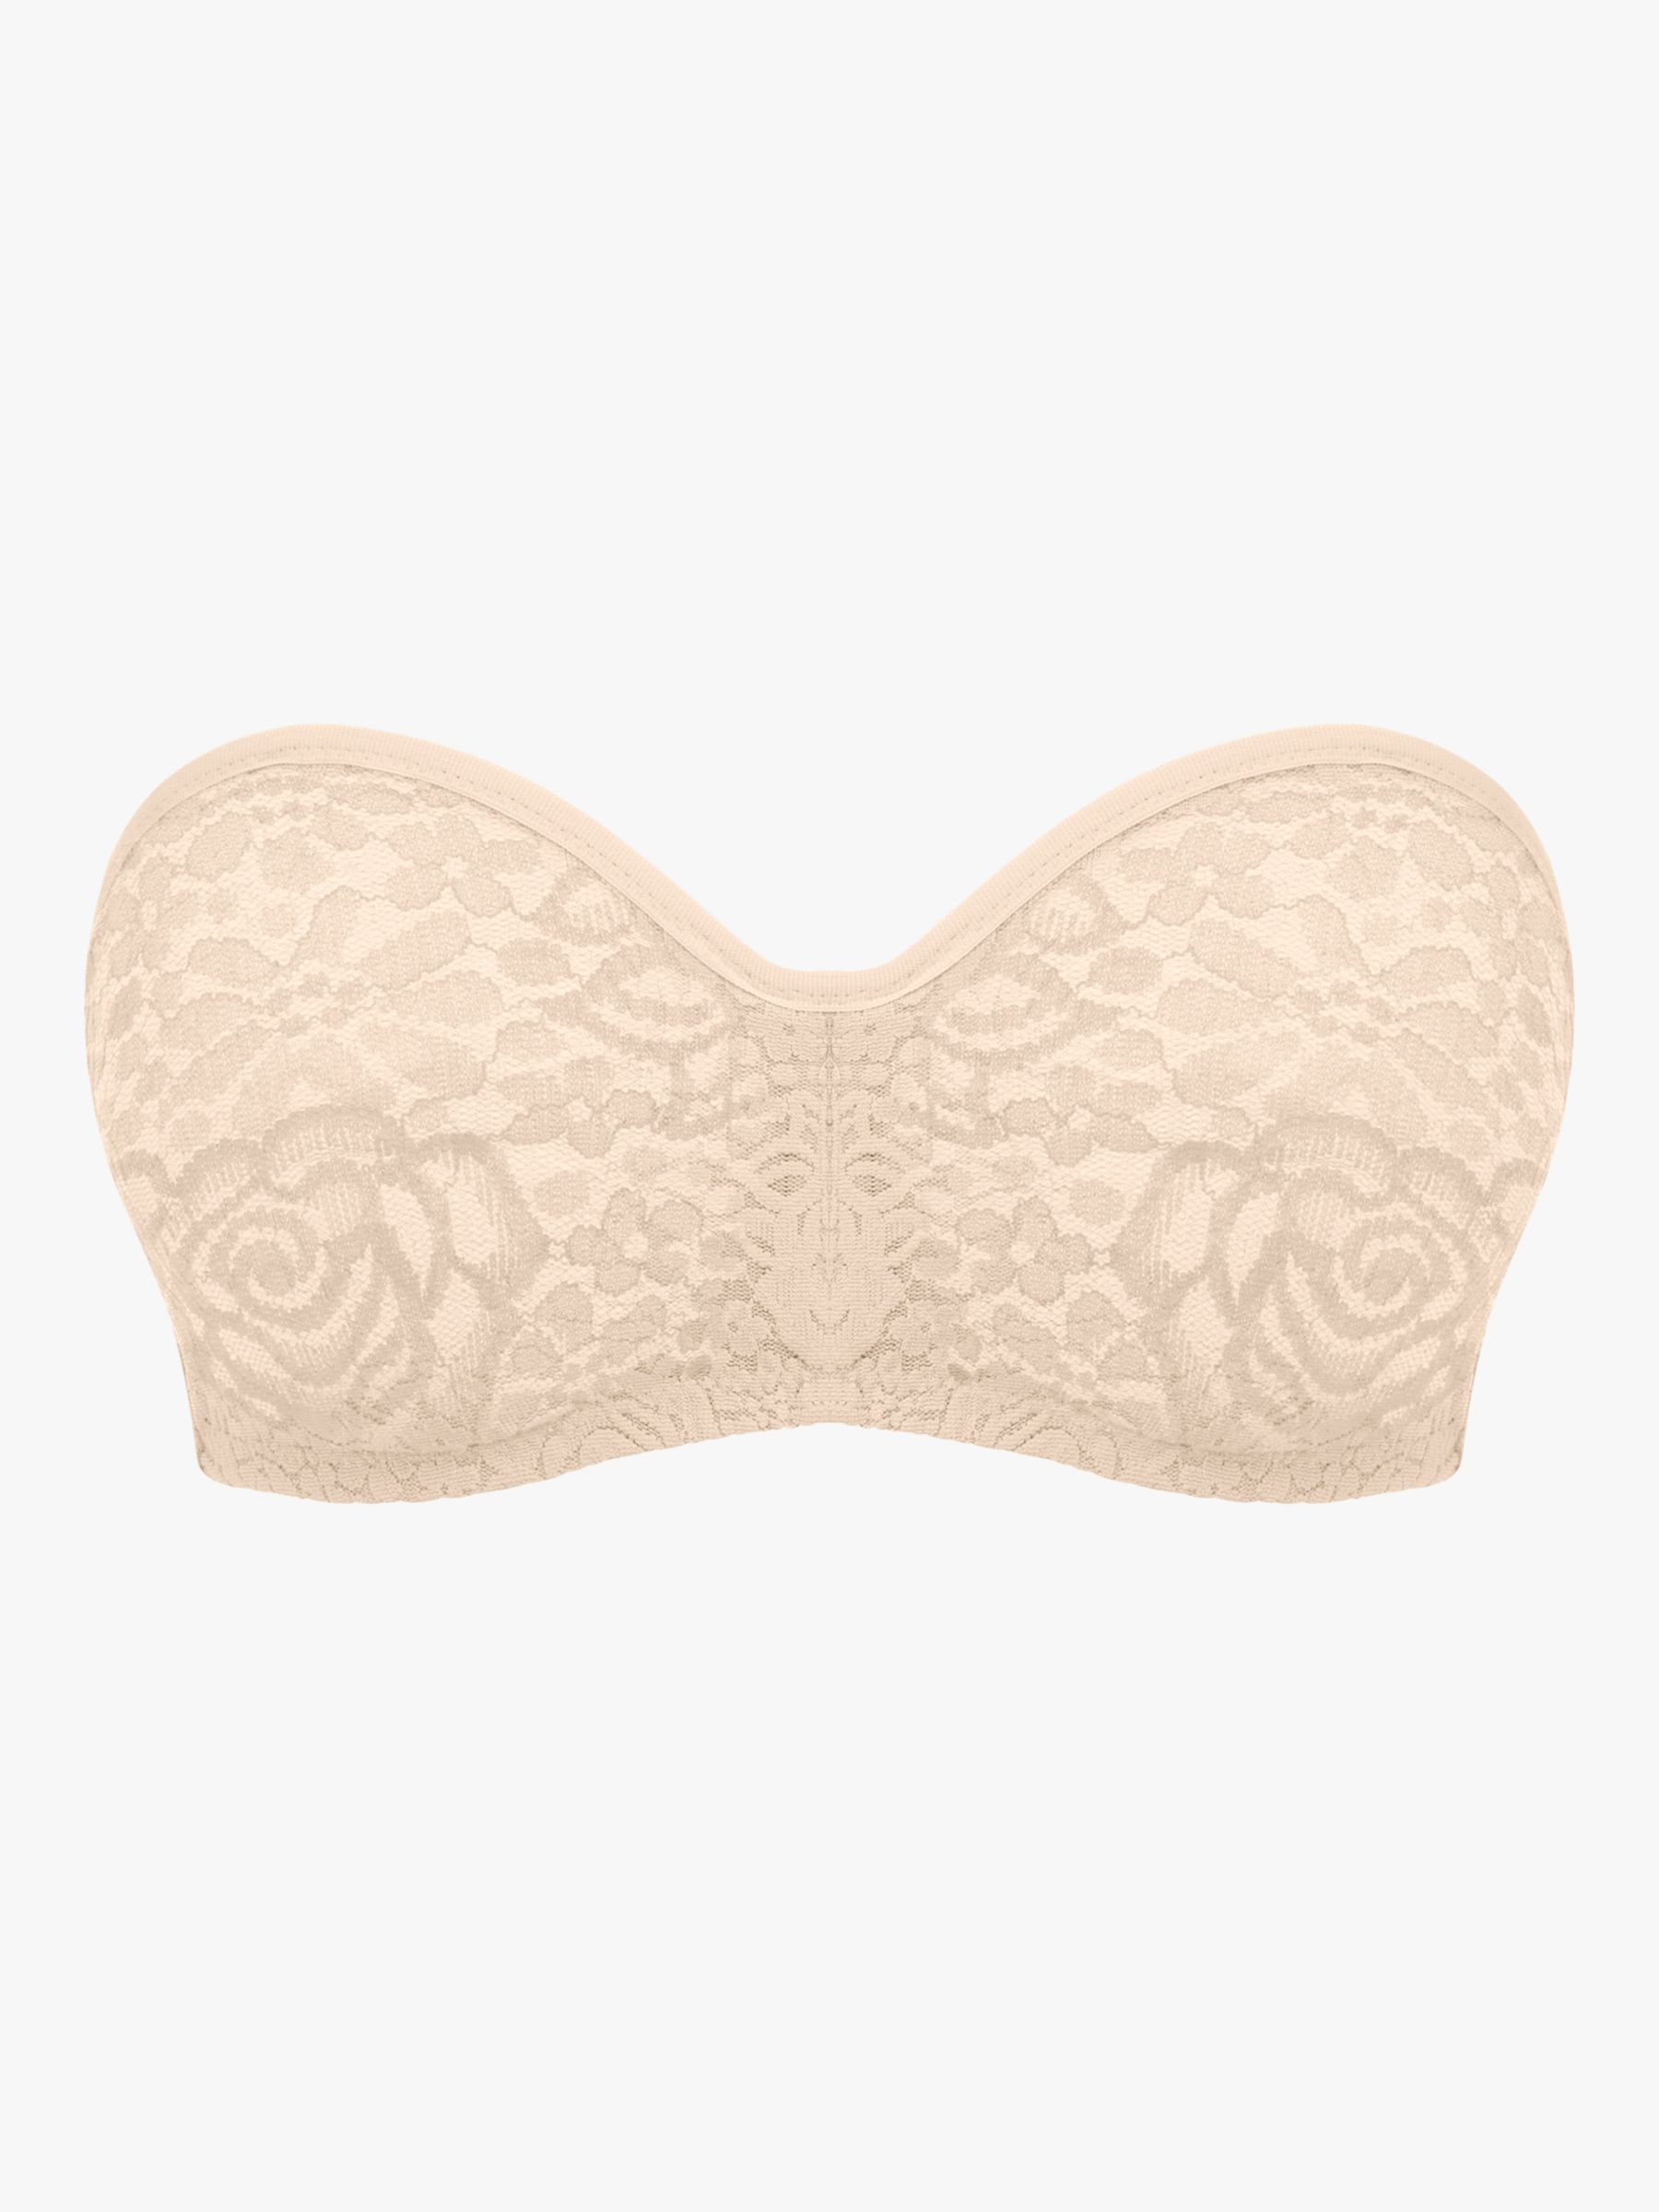 Wacoal Halo Lace Non-Padded Strapless Bra, Nude at John Lewis